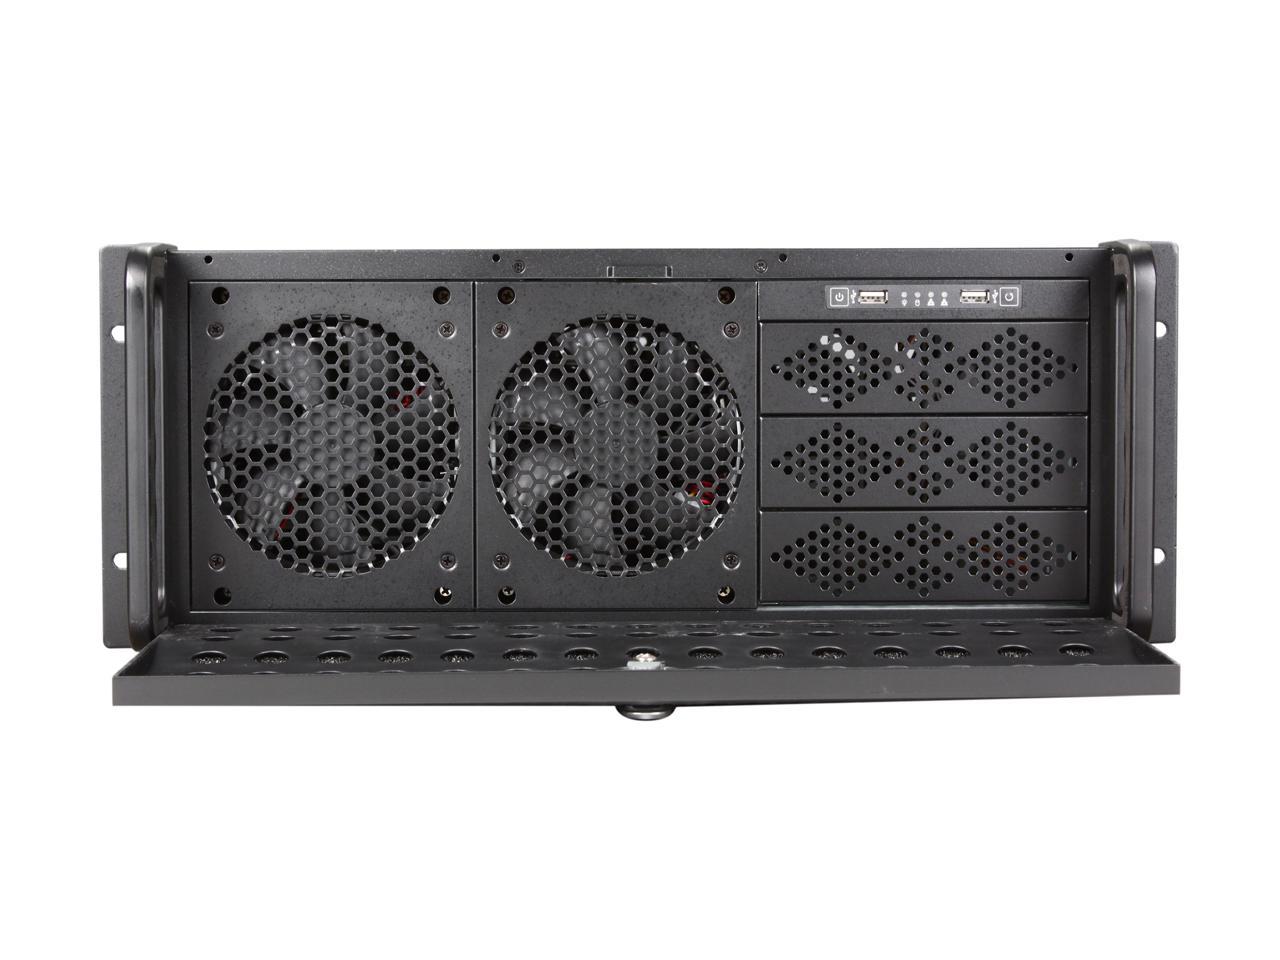 Rosewill RSV-L4000 - 4U Rackmount Server Case / Chassis - 8 Internal Bays, 7 Cooling Fans Included